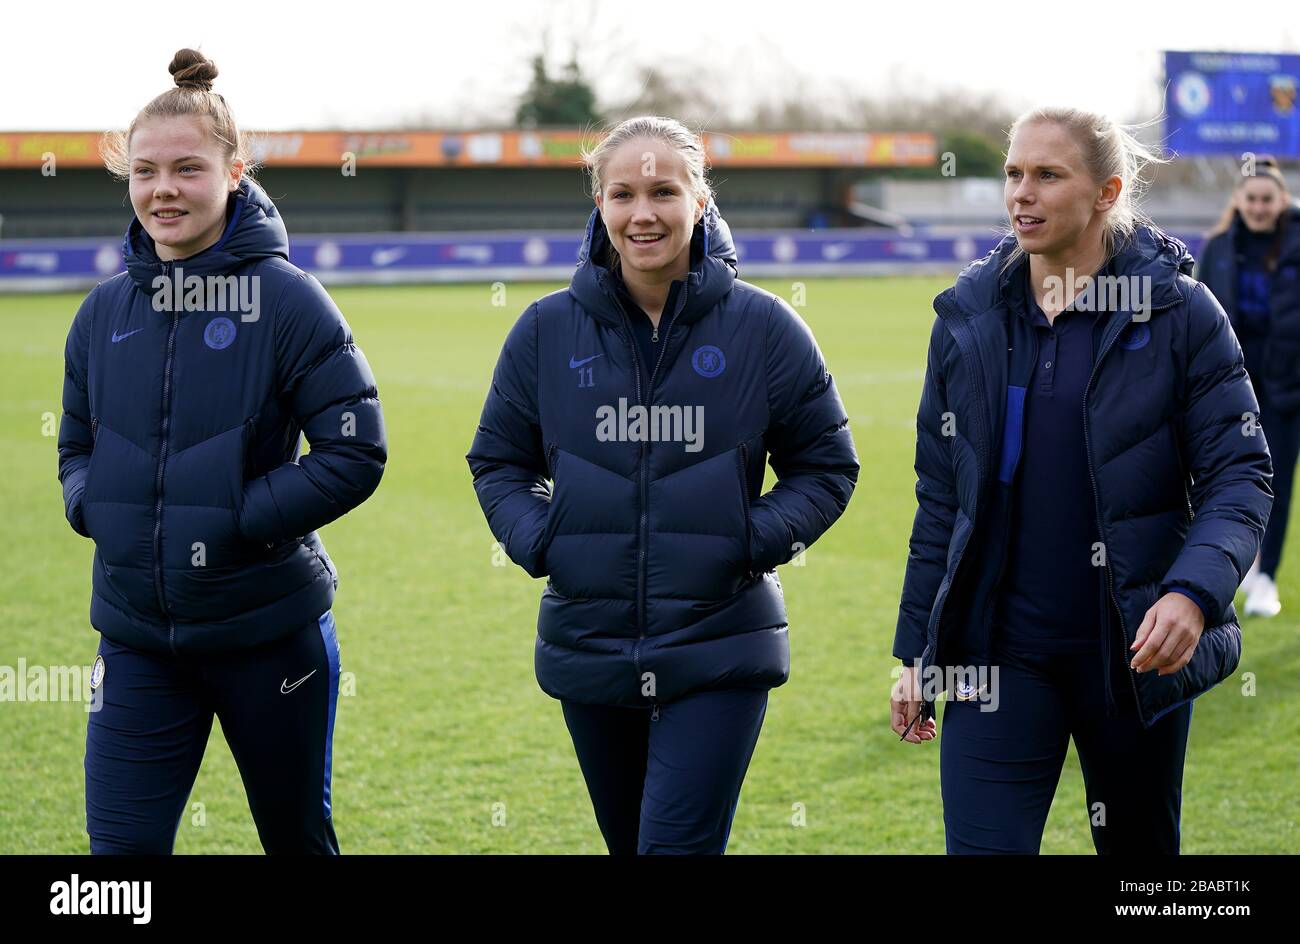 Chelsea's (left to right) Emily Murphy, Guro Reiten and Jonna Andersson before the match at Kingsmeadow Stock Photo